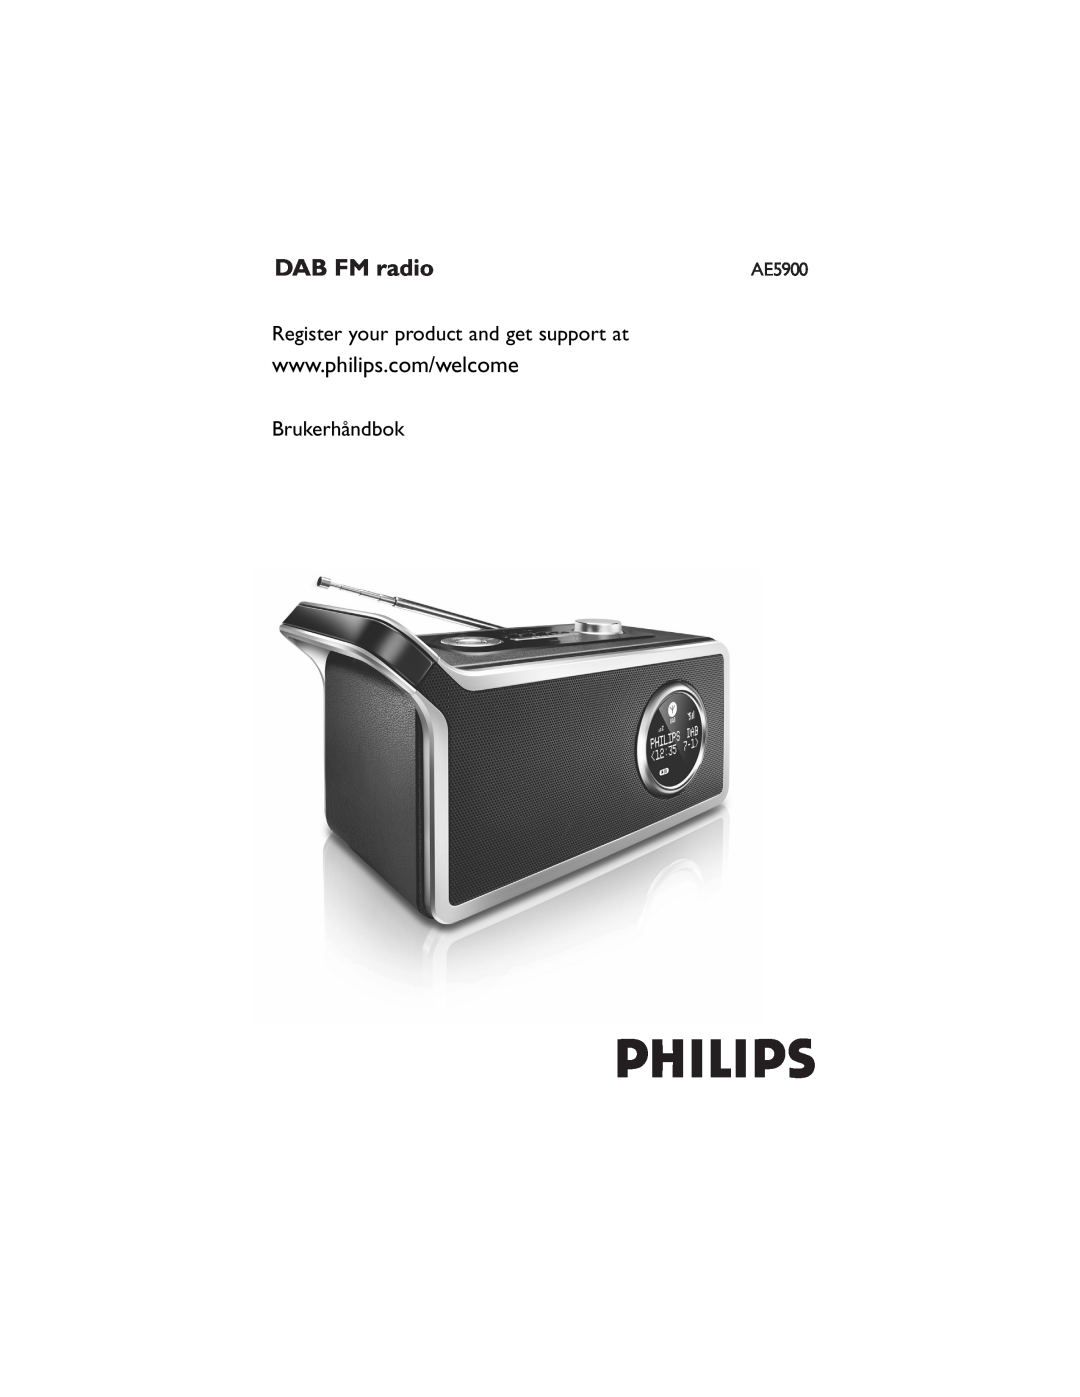 Philips AE5900 user manual Brukerhåndbok, DAB FM radio, Register your product and get support at 